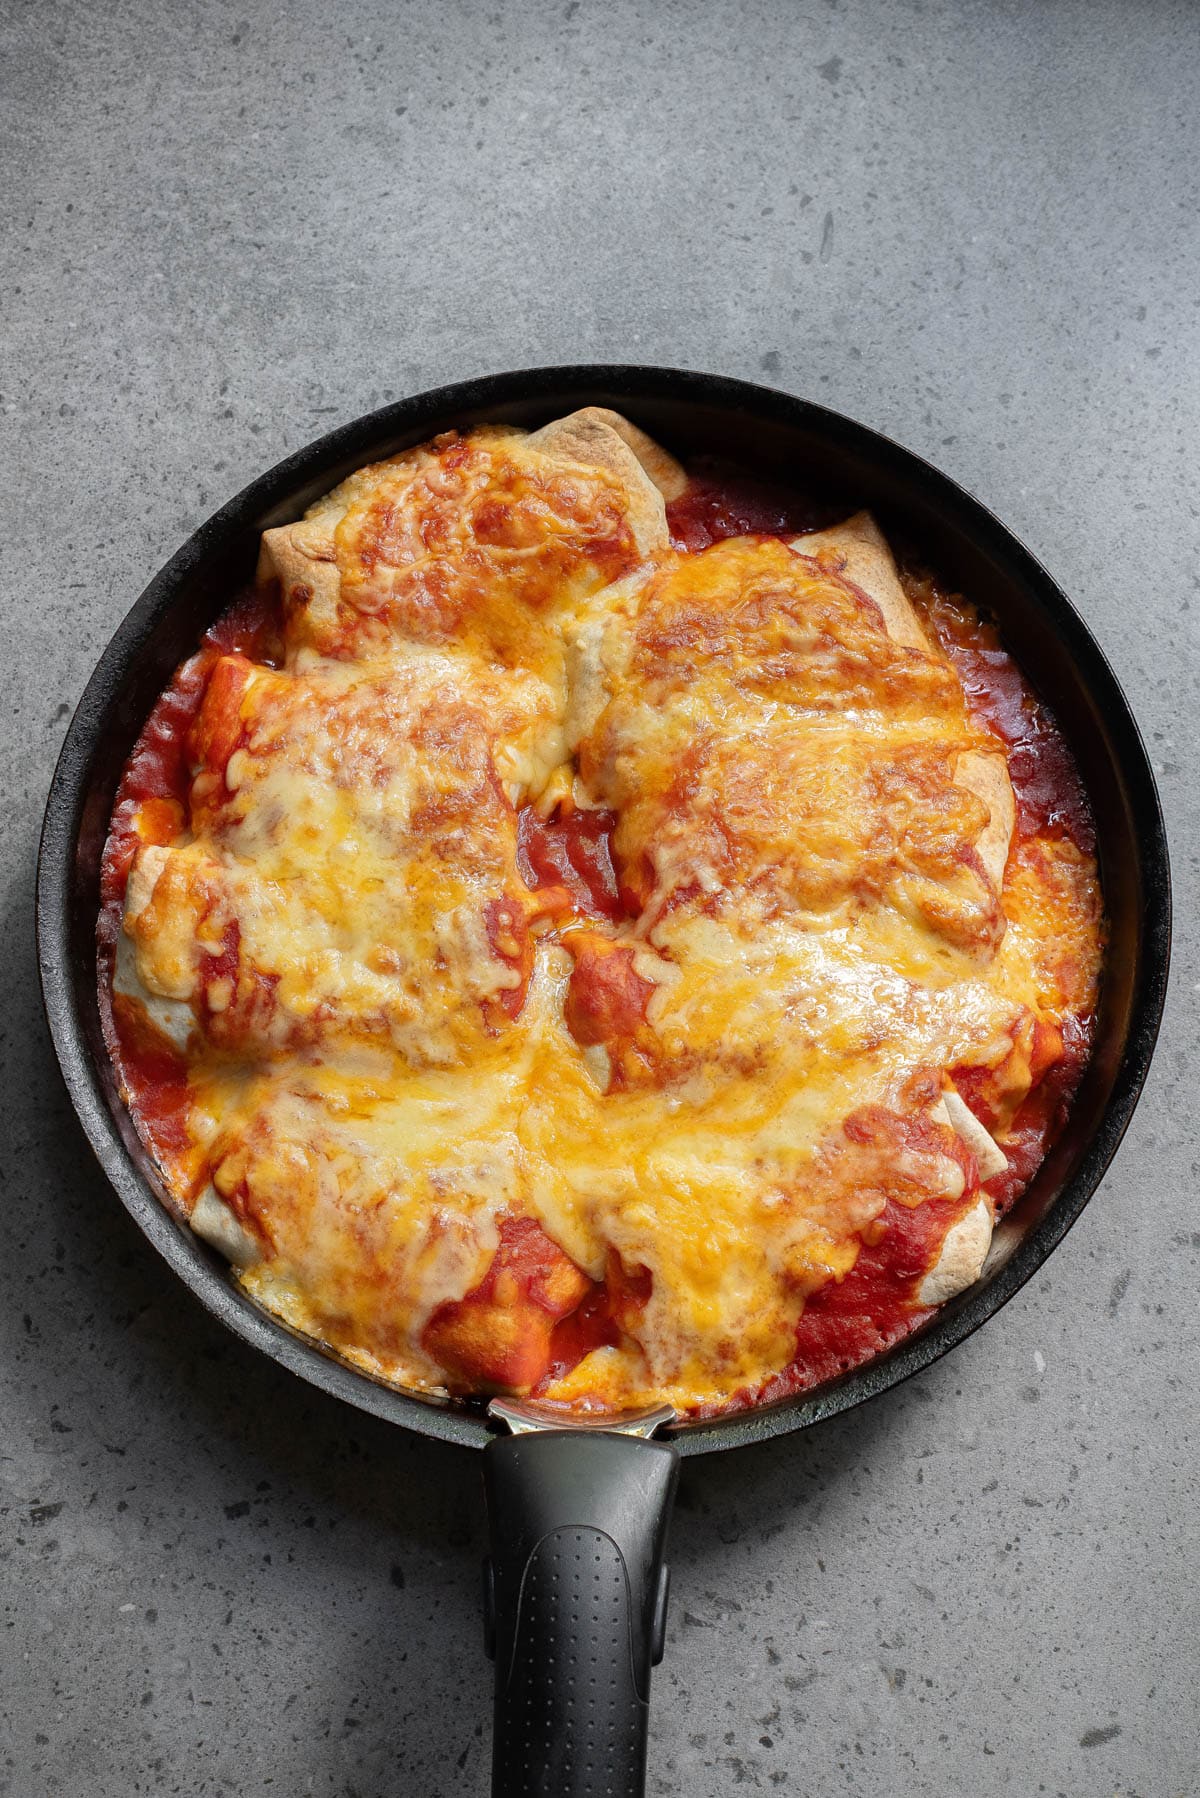 Baked tortillas folded and covered in sauce and melted cheese in a cast iron skillet.